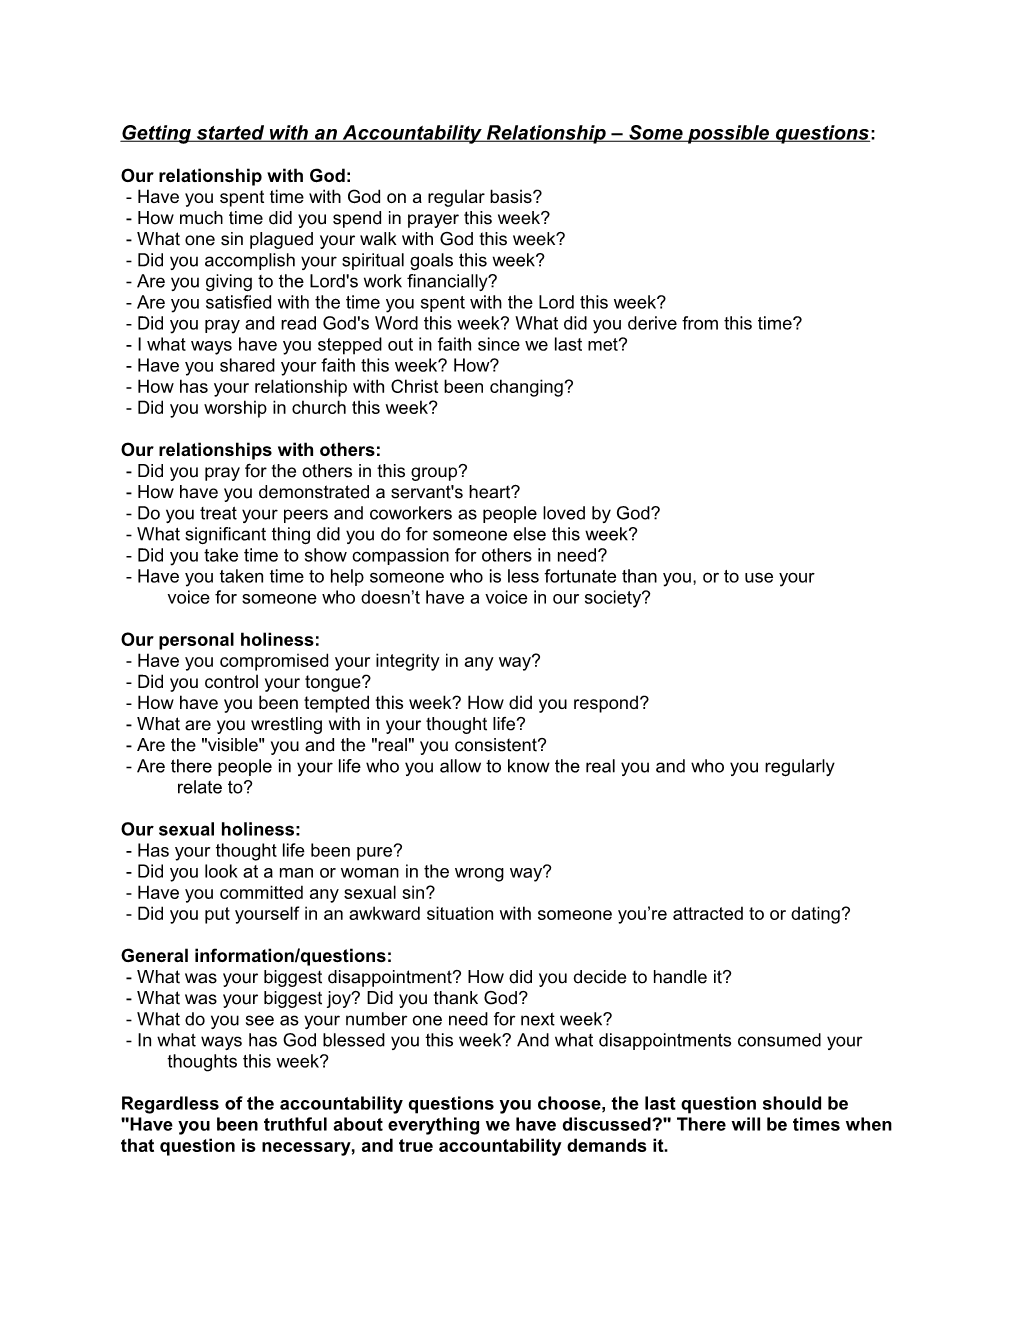 Getting Started with an Accountability Relationship Some Possible Questions